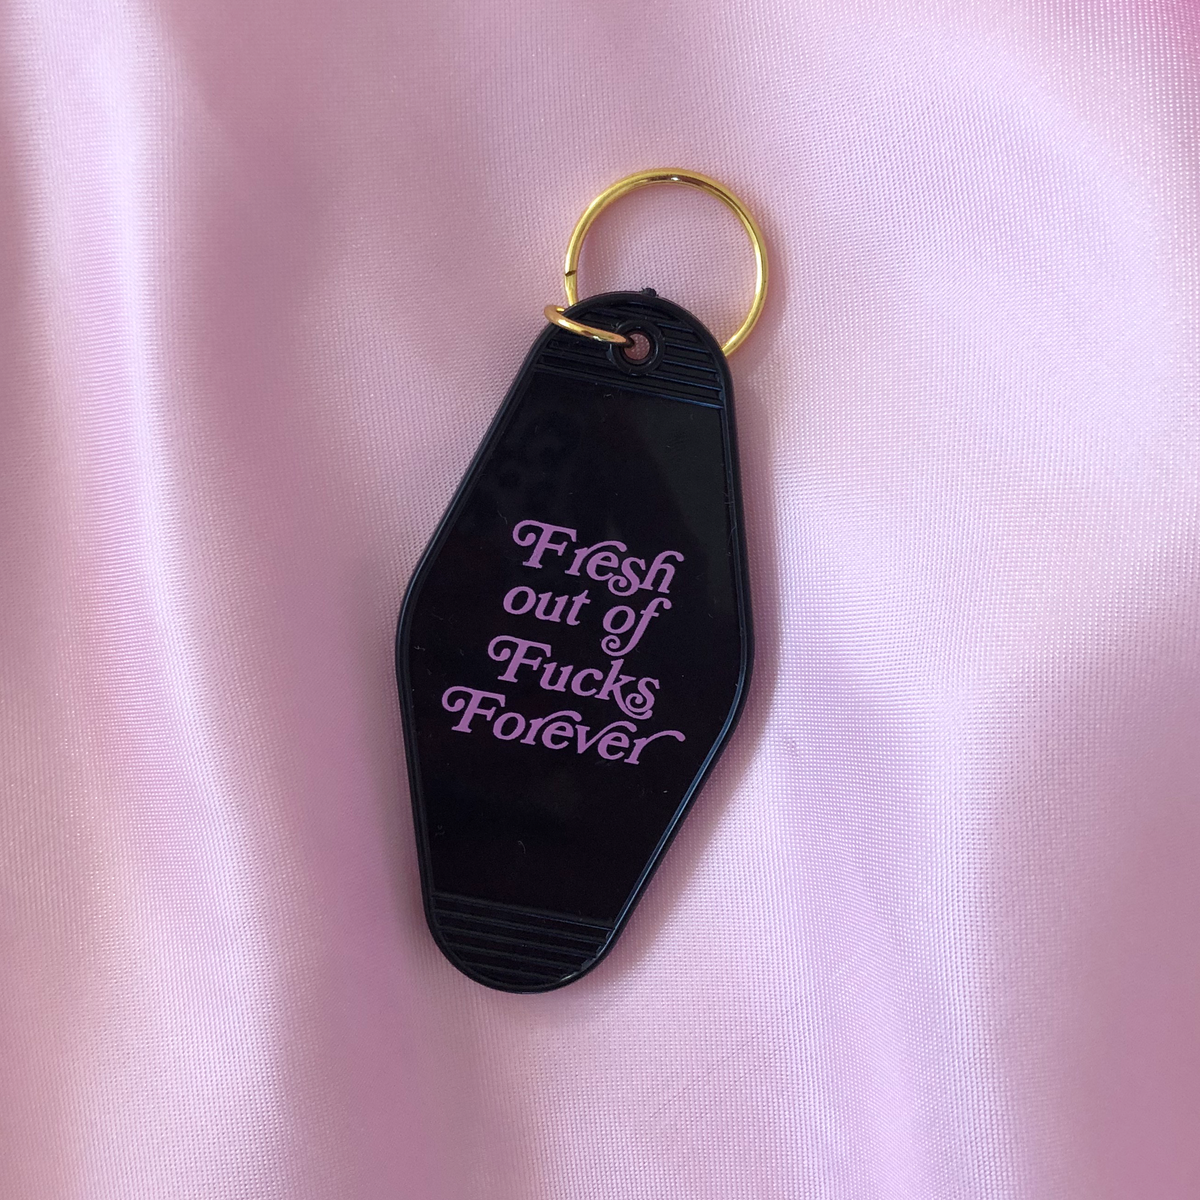 Fresh out of Fucks Forever Keychain